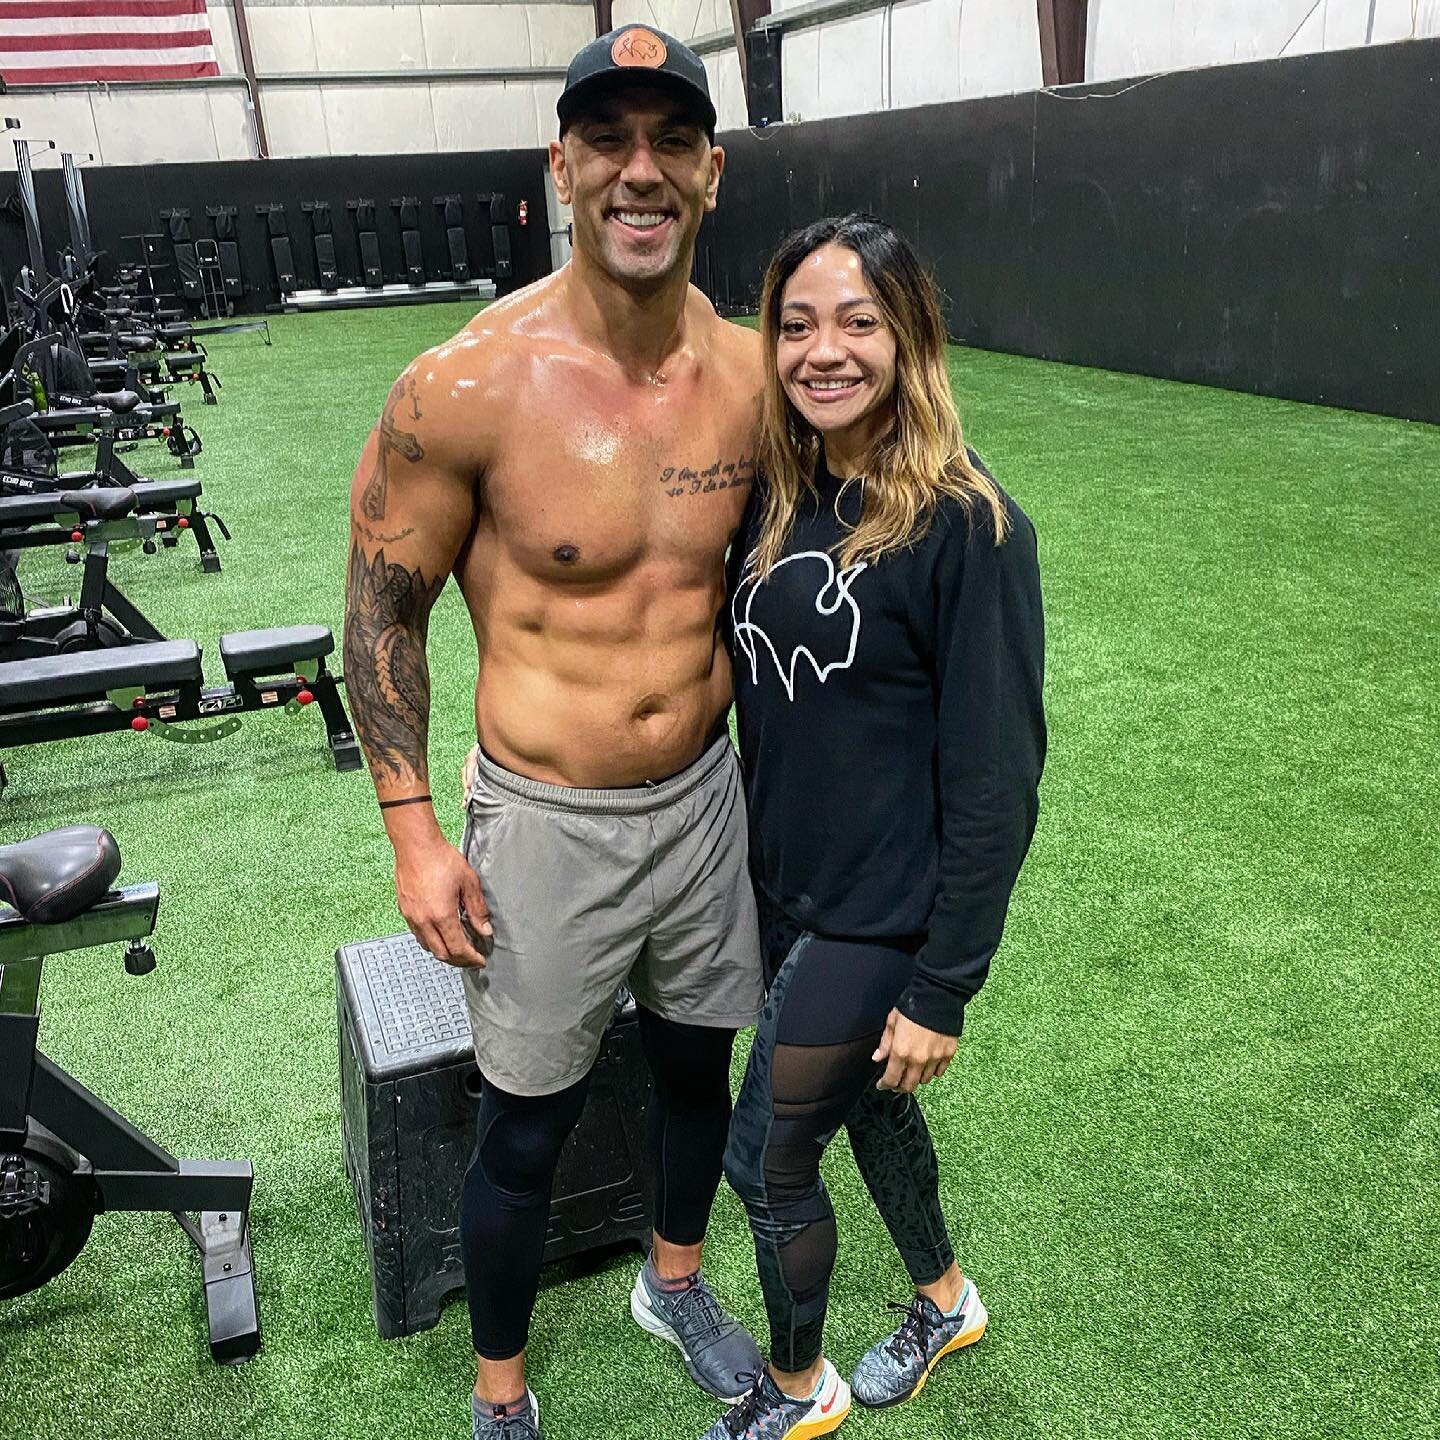 Rise and Grind from Maple Valley! Morning sweat with my Queen @evelynbruce #TheBuffaloGYM #MapleValley #GYM #POTD @happygwb @lululemon #Lululemon